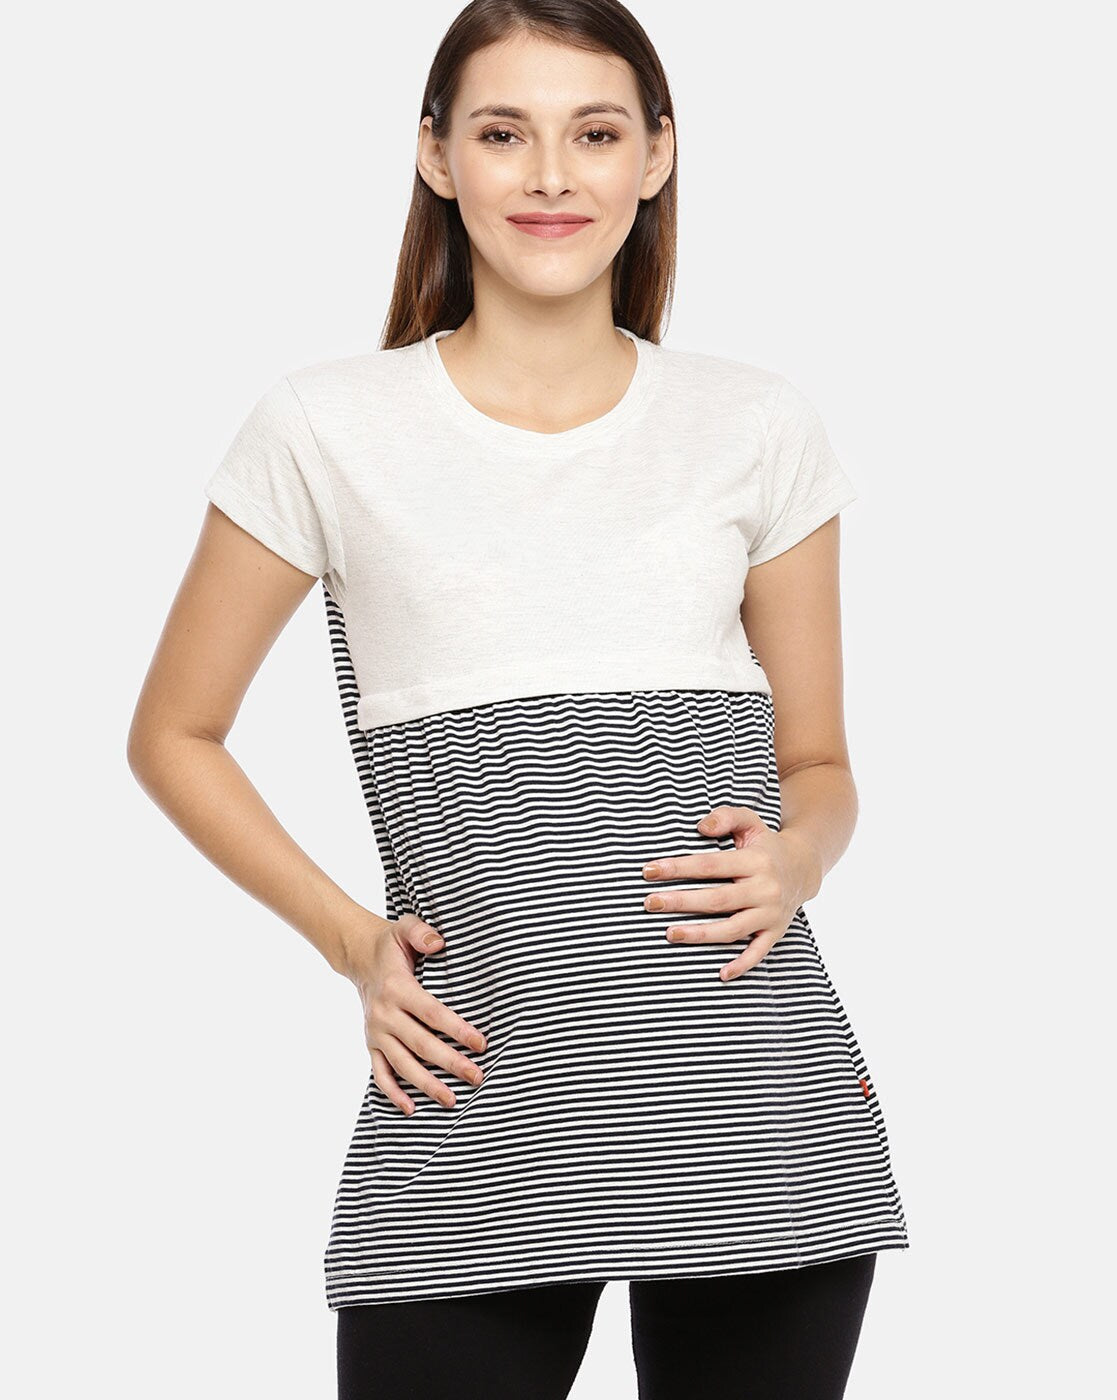 Womens Striped Longline Maternity Tees - Off white